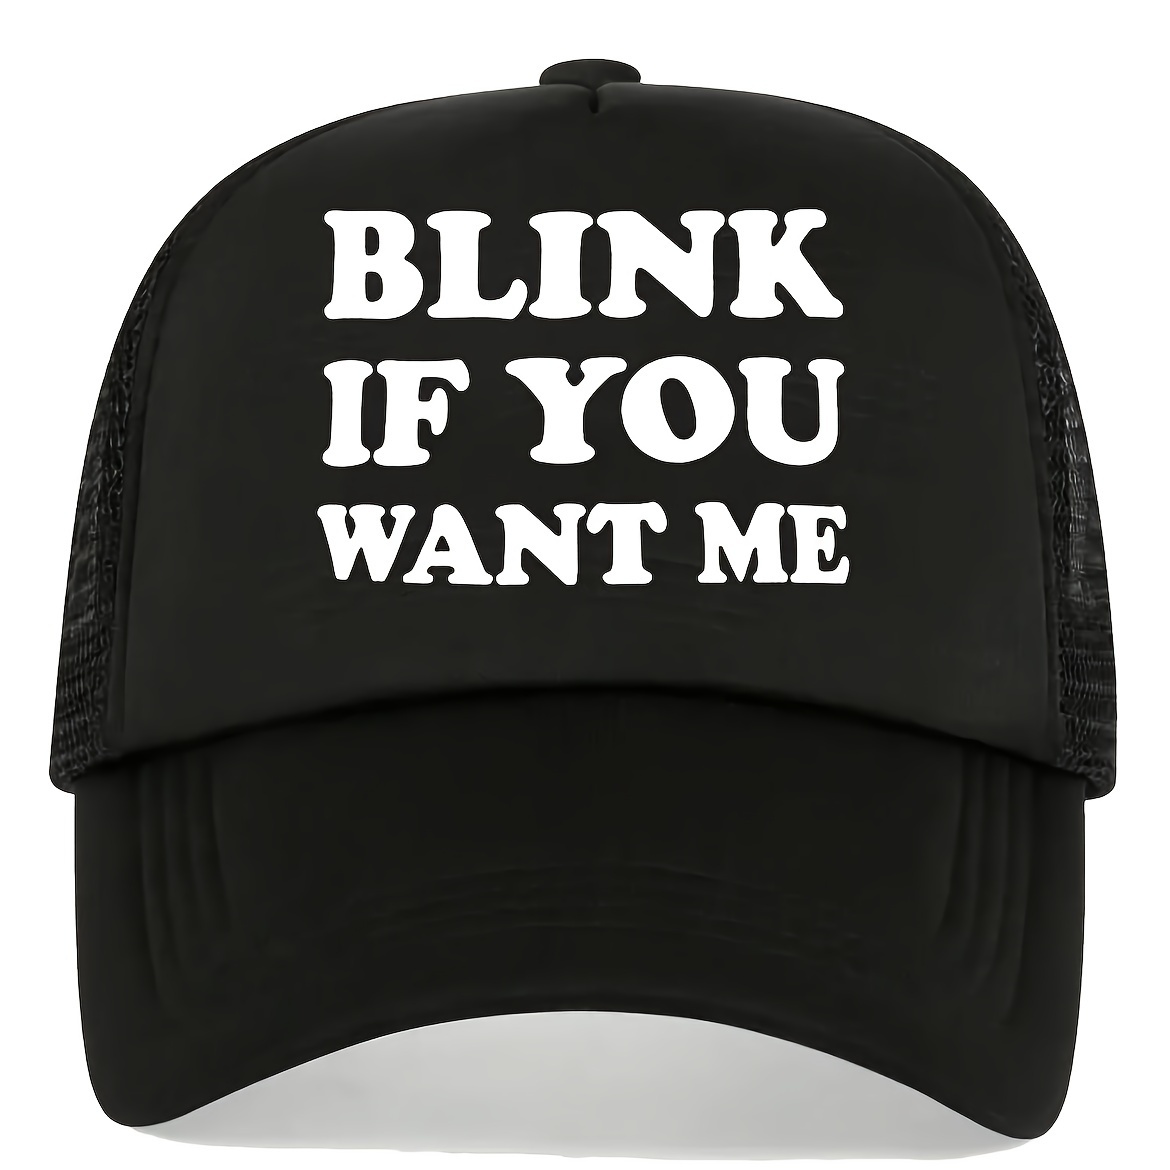 

Cool Breathable Classic Baseball Cap, Blink Print Hippie Trucker Hat, Snapback Hat For Casual Leisure Outdoor Sports